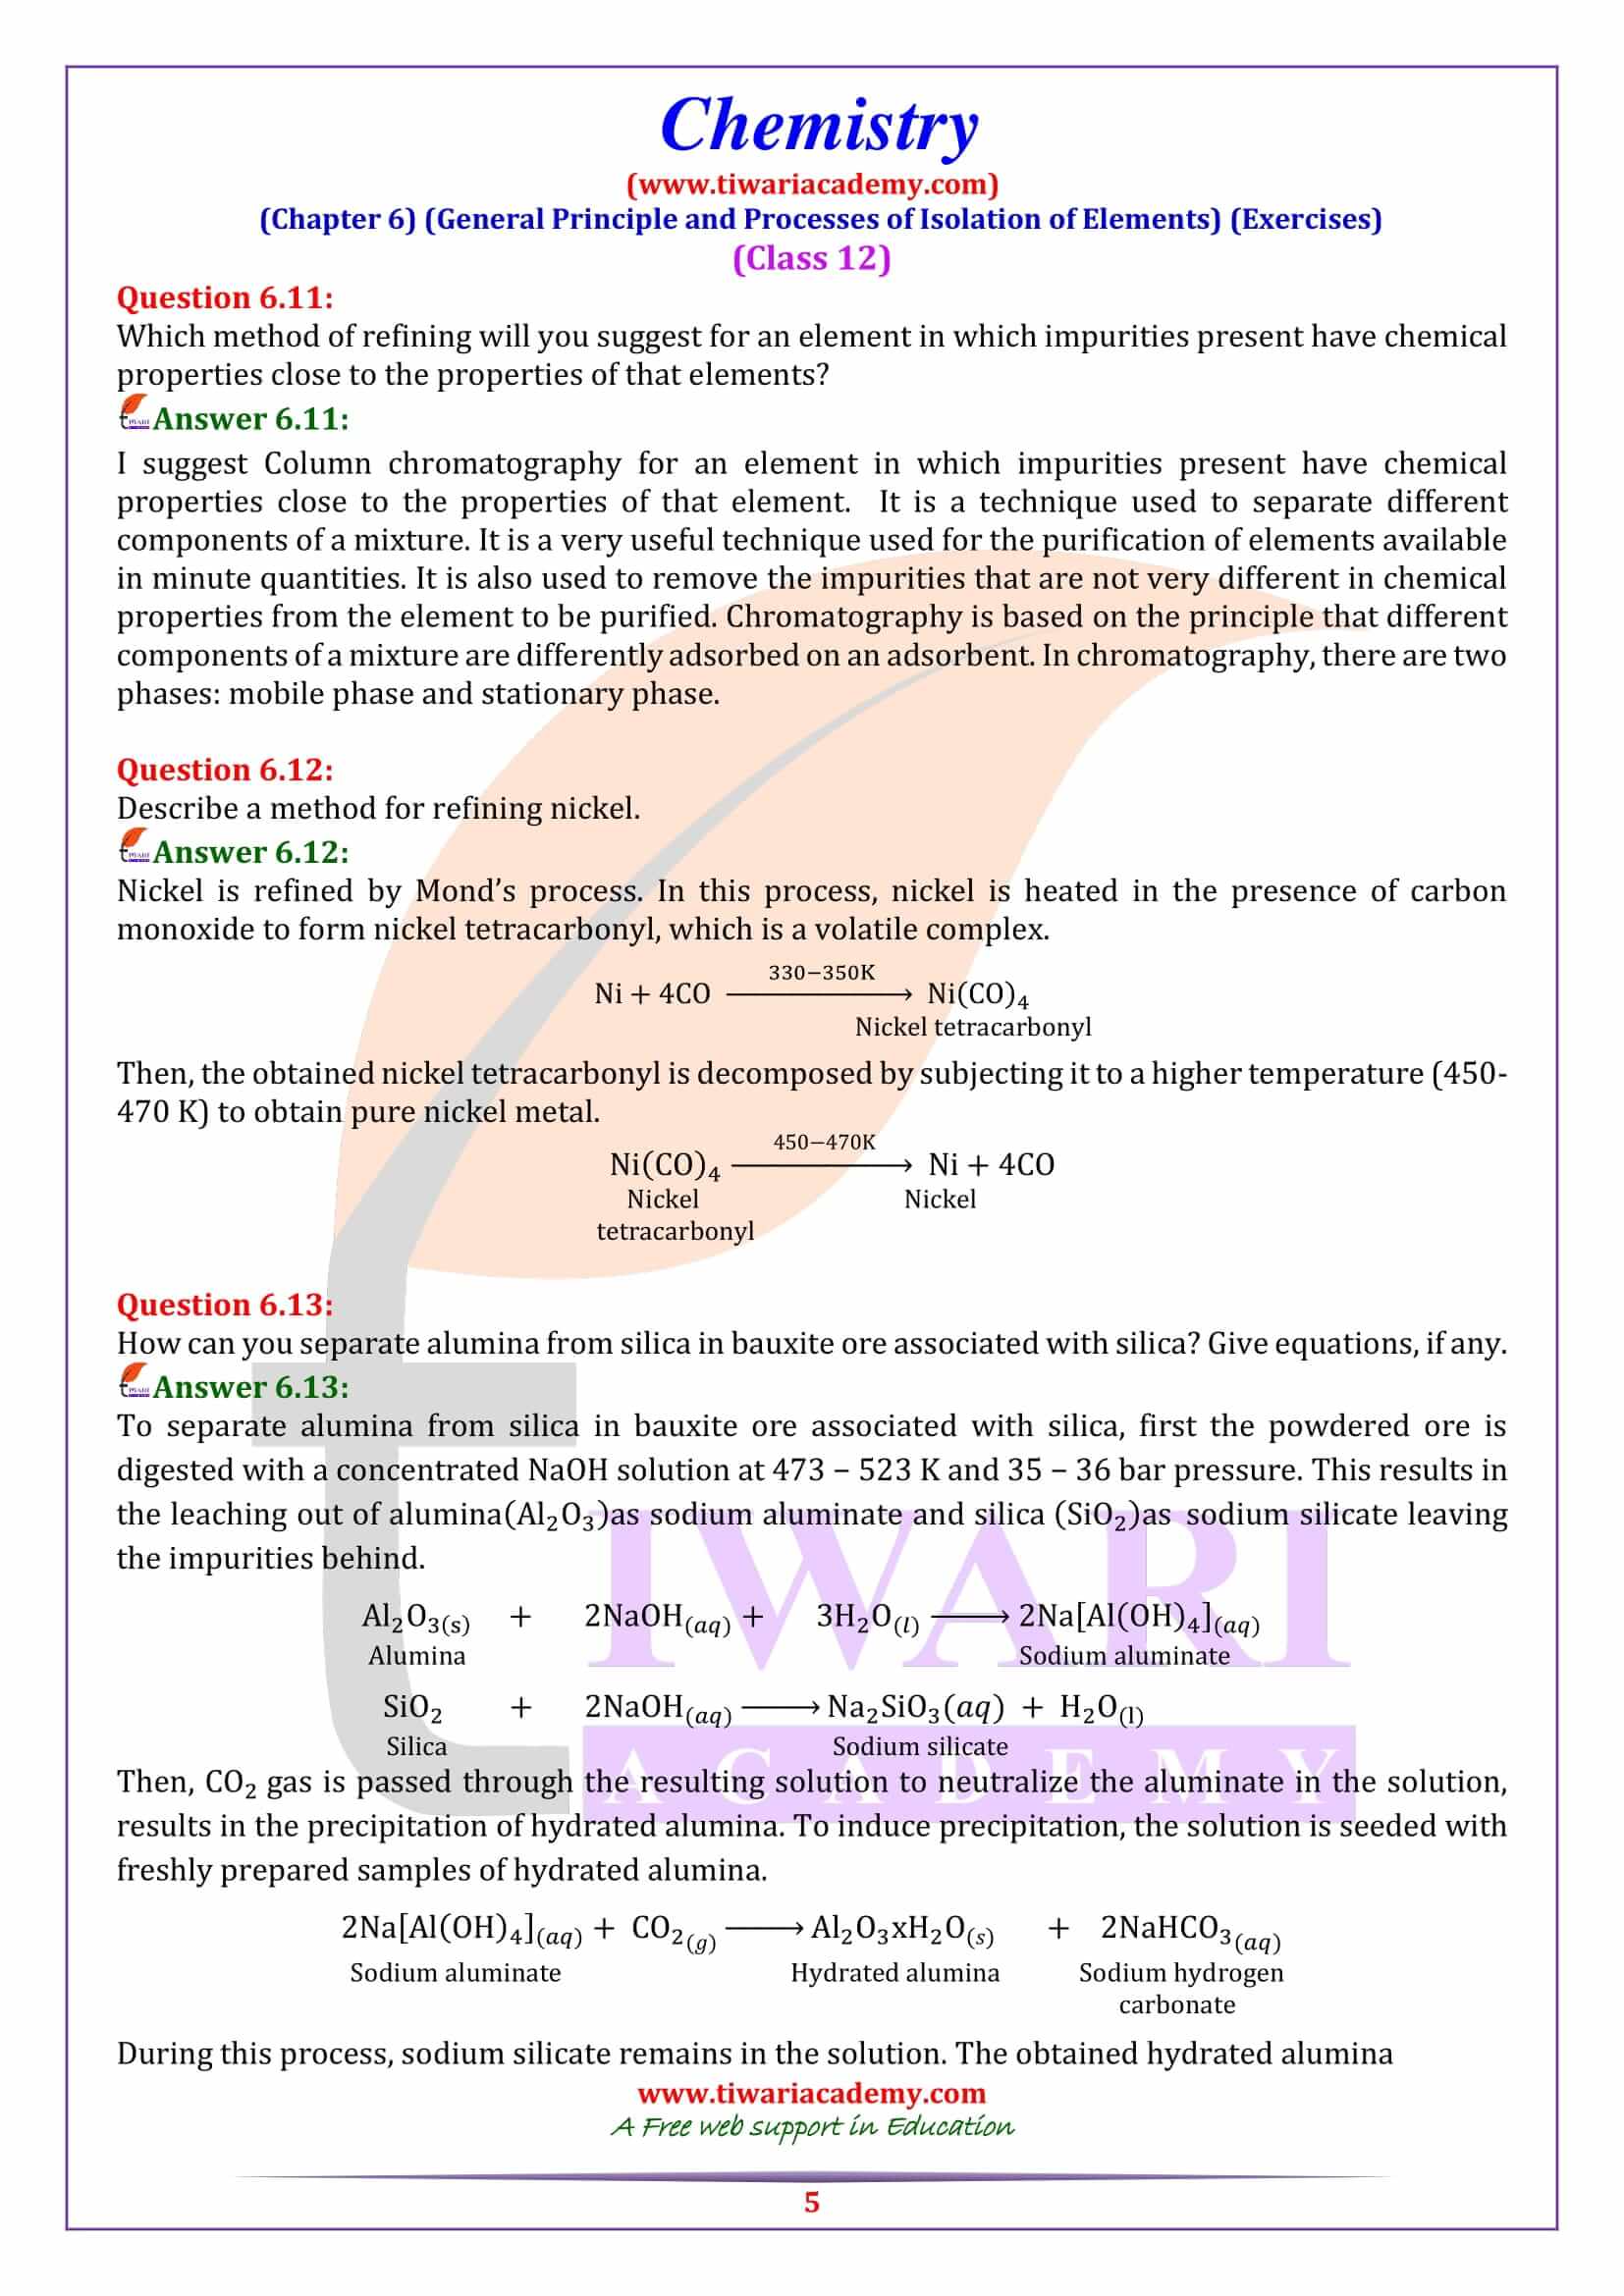 NCERT Solutions for Class 12 Chemistry Chapter 6 free download